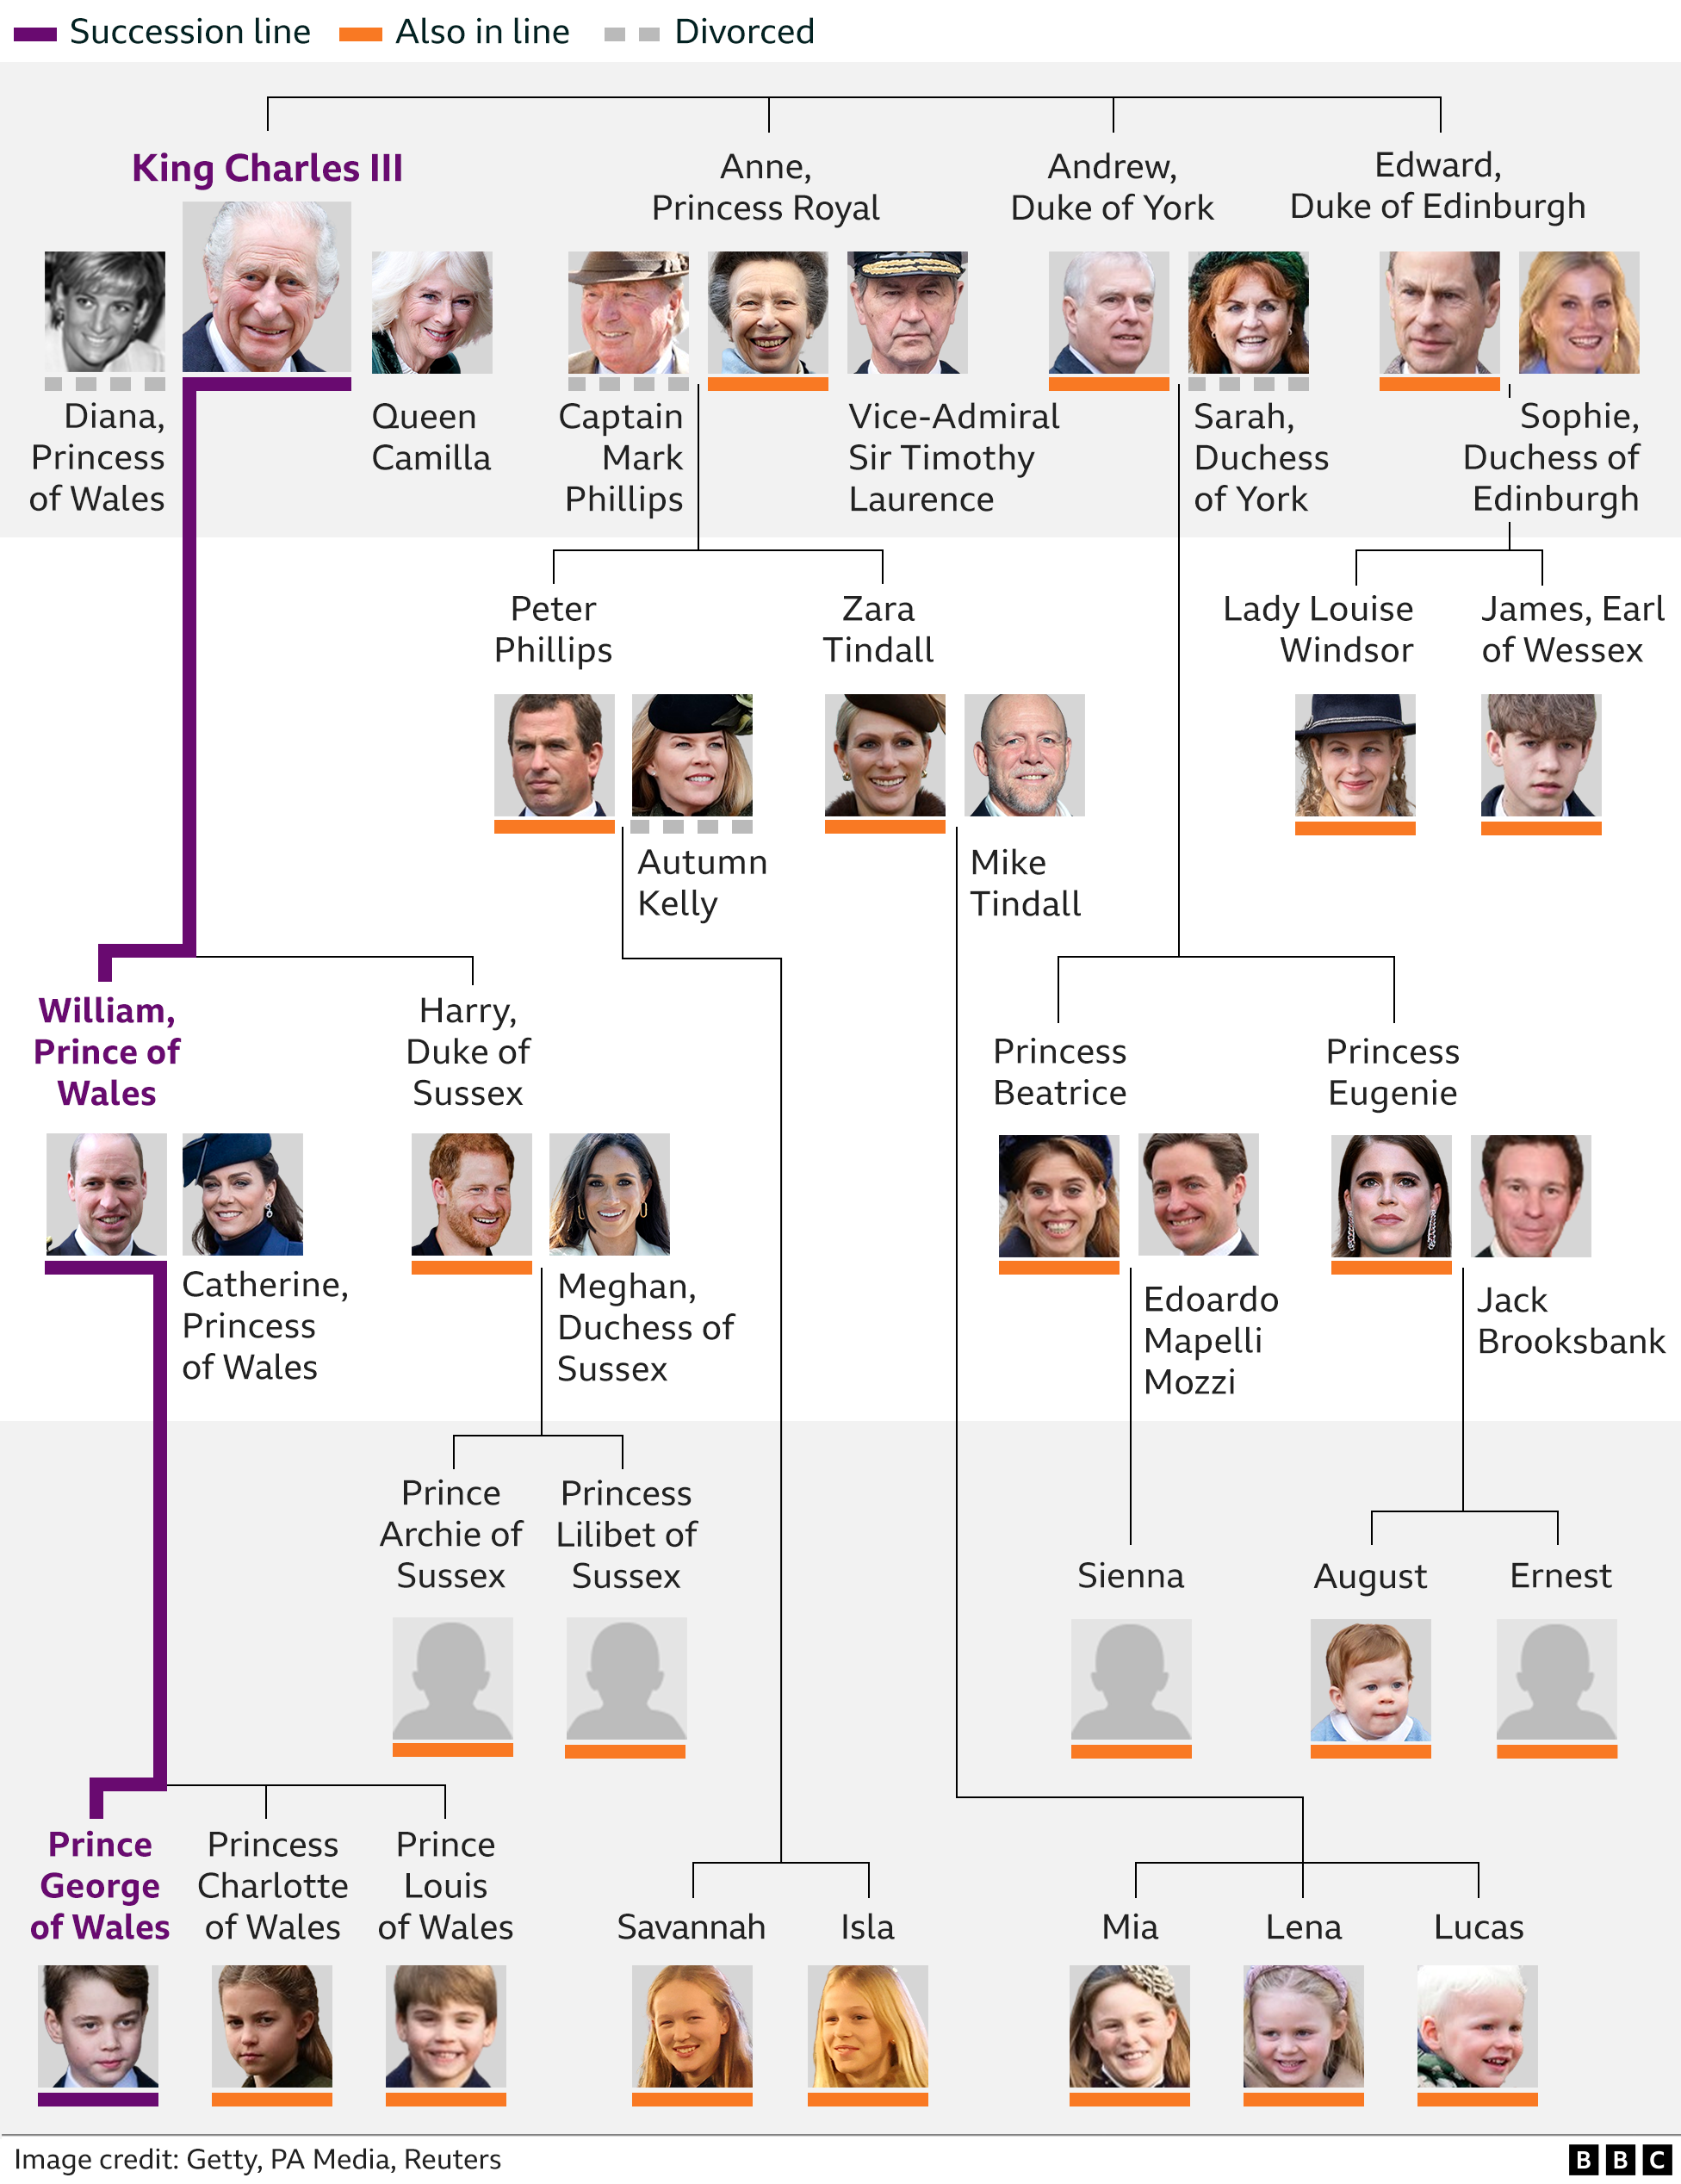 A family tree graphic showing Queen Elizabeth II's children Charles, Anne, Andrew and Edward and their families. It also shows the line of succession from King Charles III to his son William and grandson George